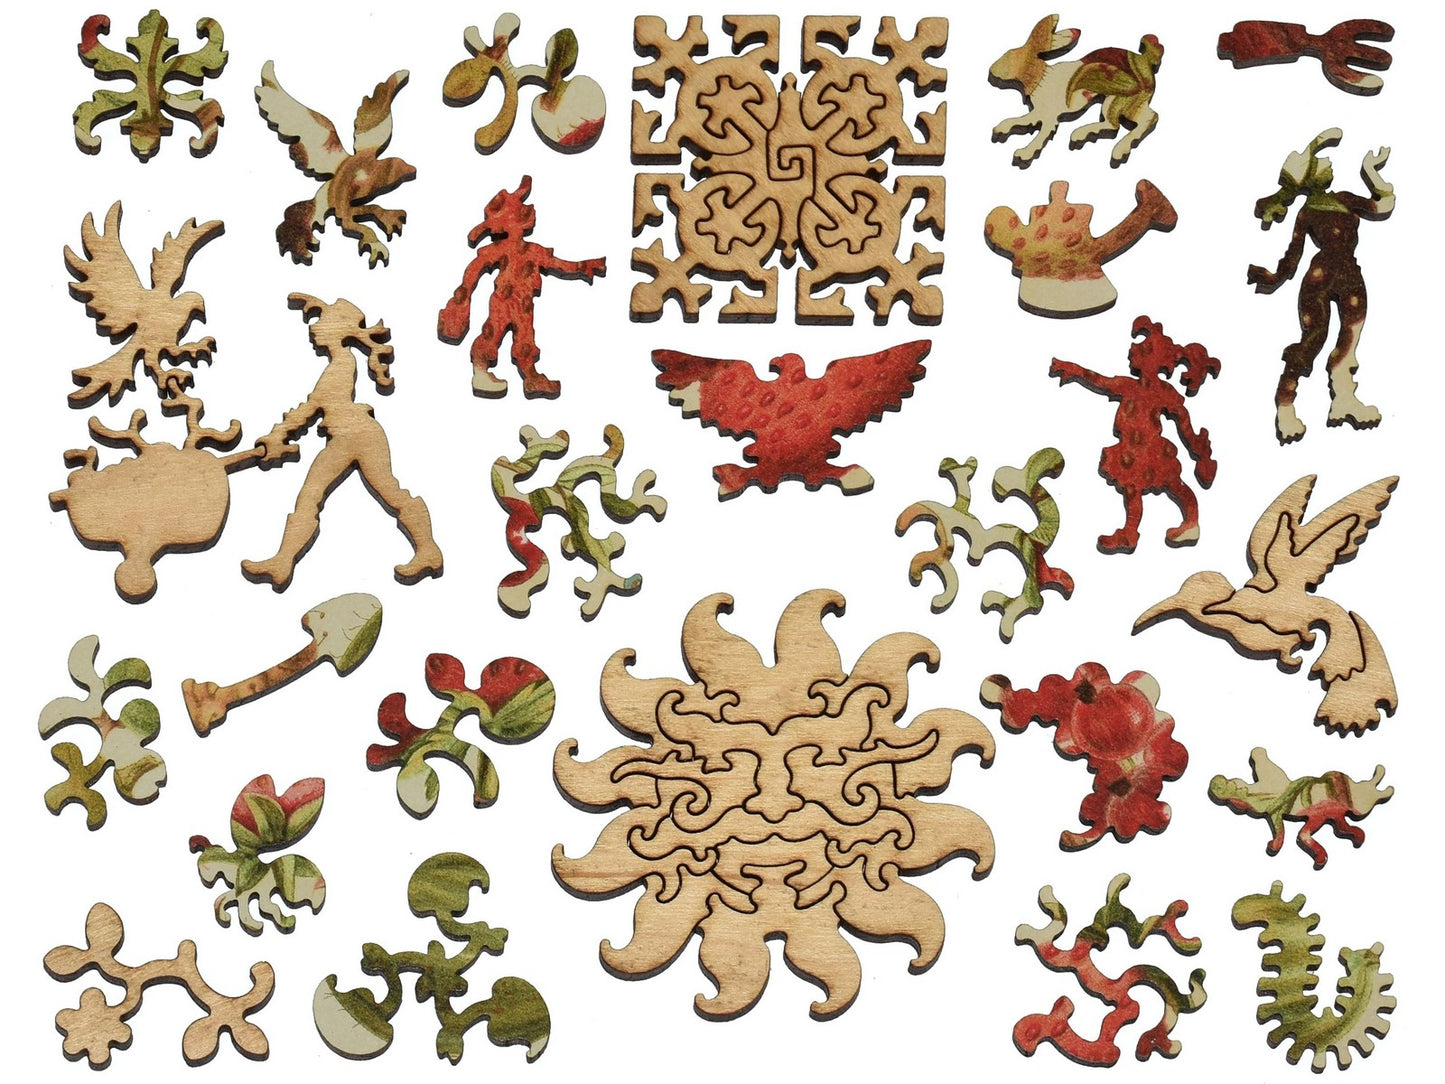 The whimsies that can be found in the puzzle, Heirloom Berry Assortment.